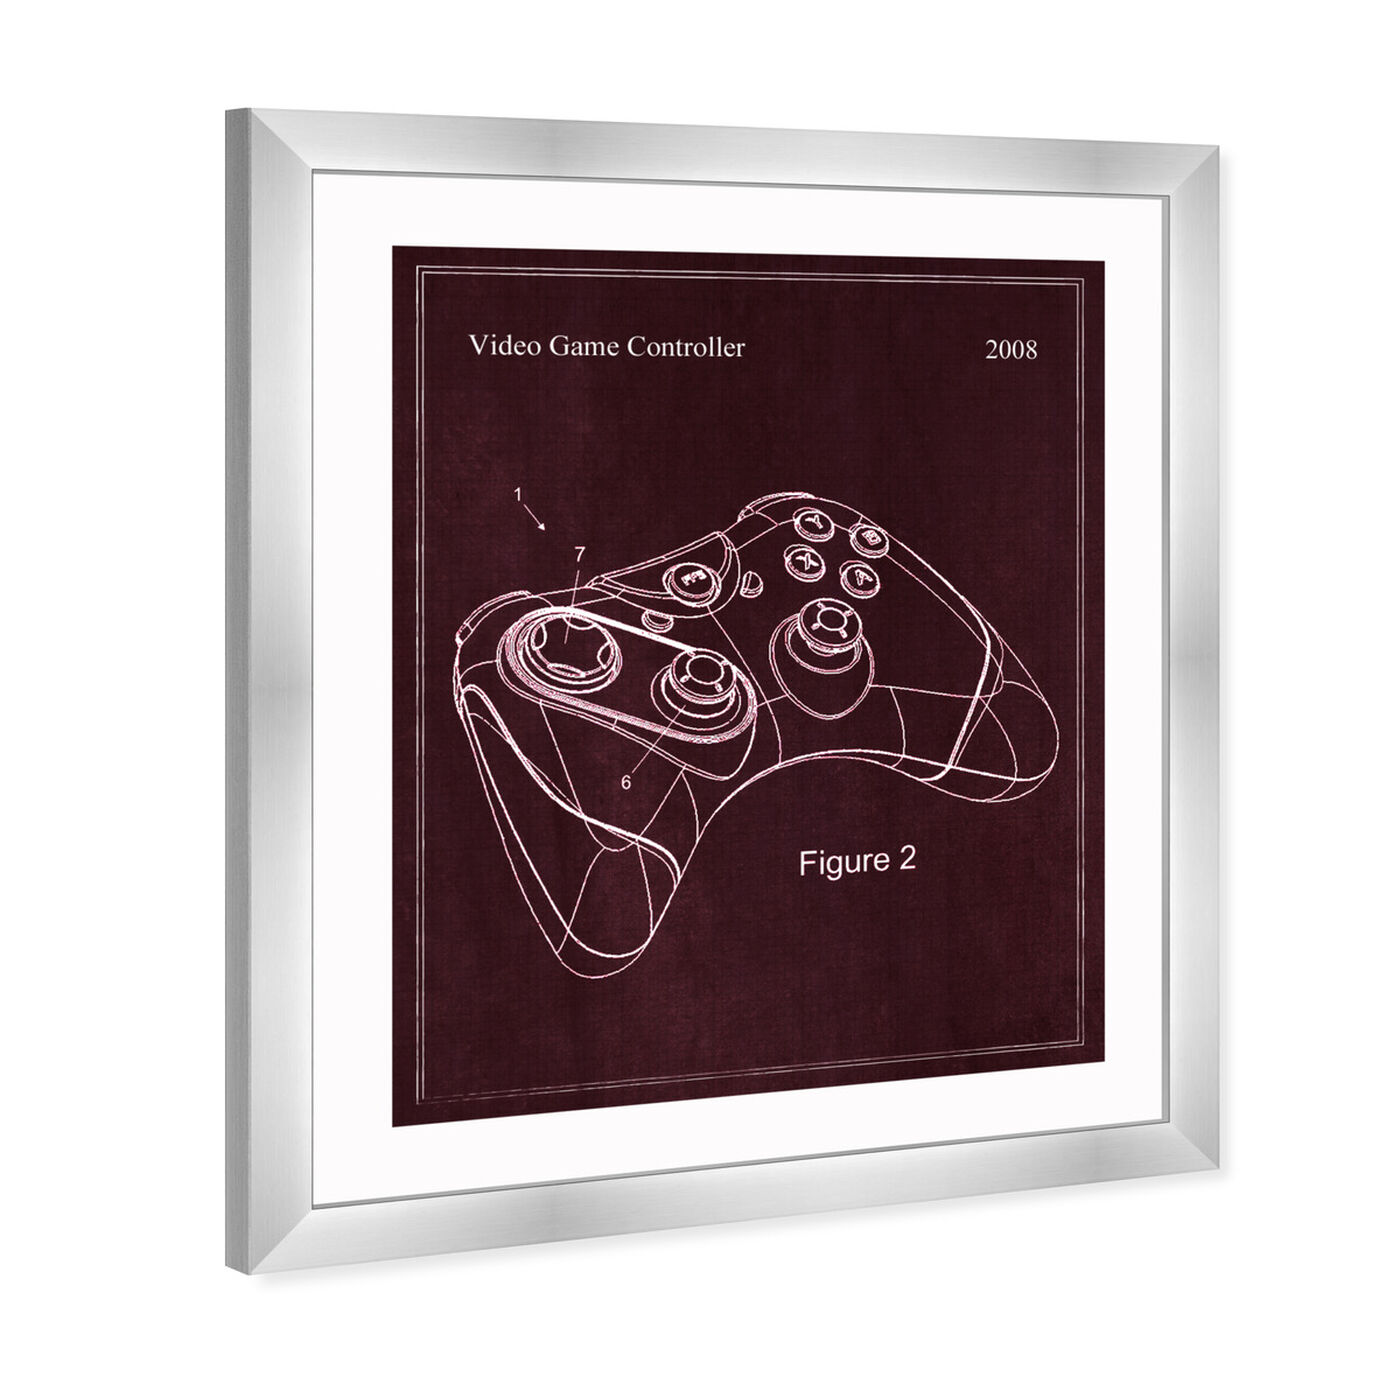 Angled view of Video Game Controller, 2008 featuring entertainment and hobbies and video games art.